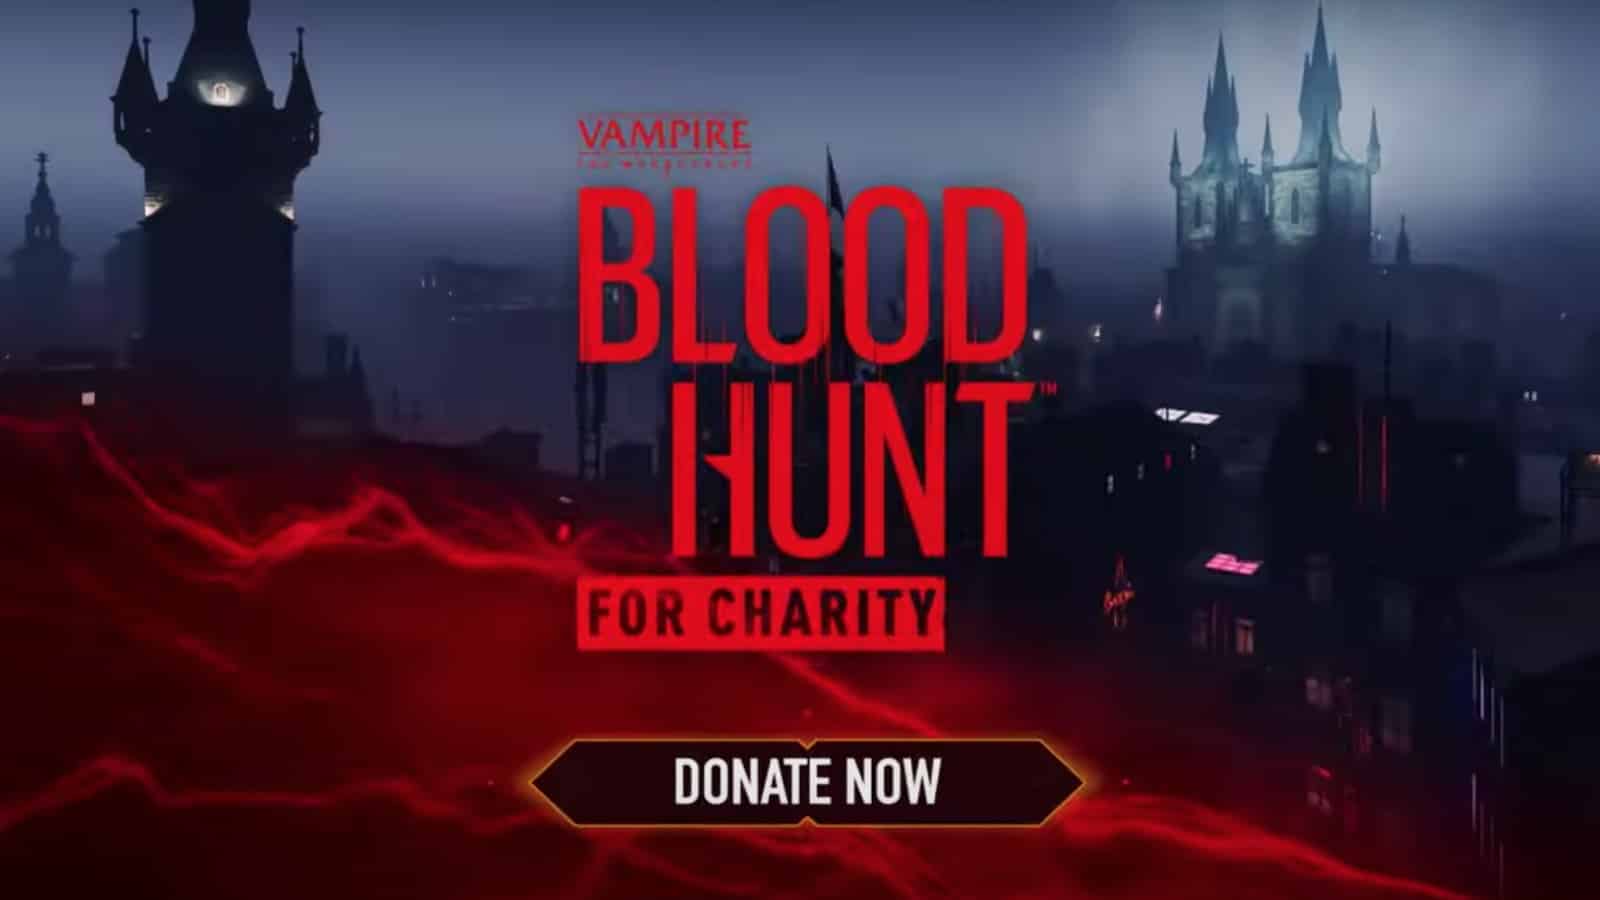 How to claim Vampire The Masquerade Bloodhunt Twitch drops - Dexerto